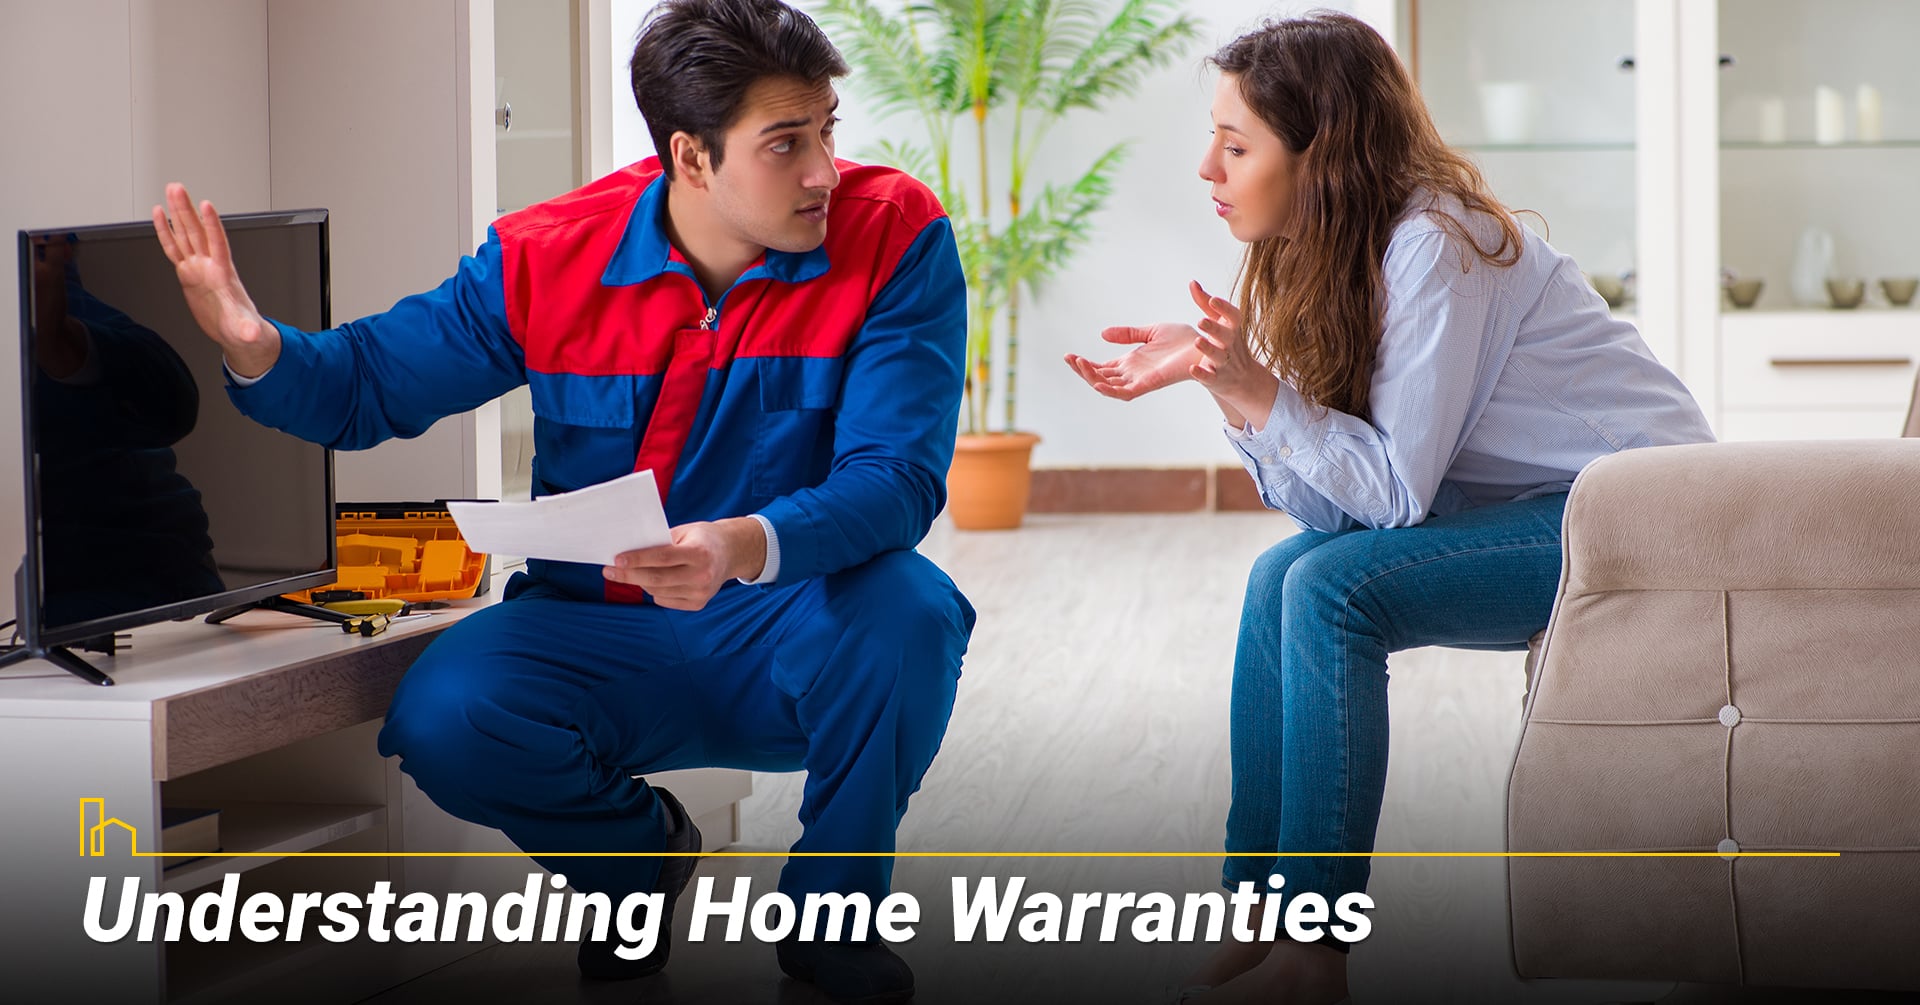 Evaluating the Impact of a Home Warranty on Home Value